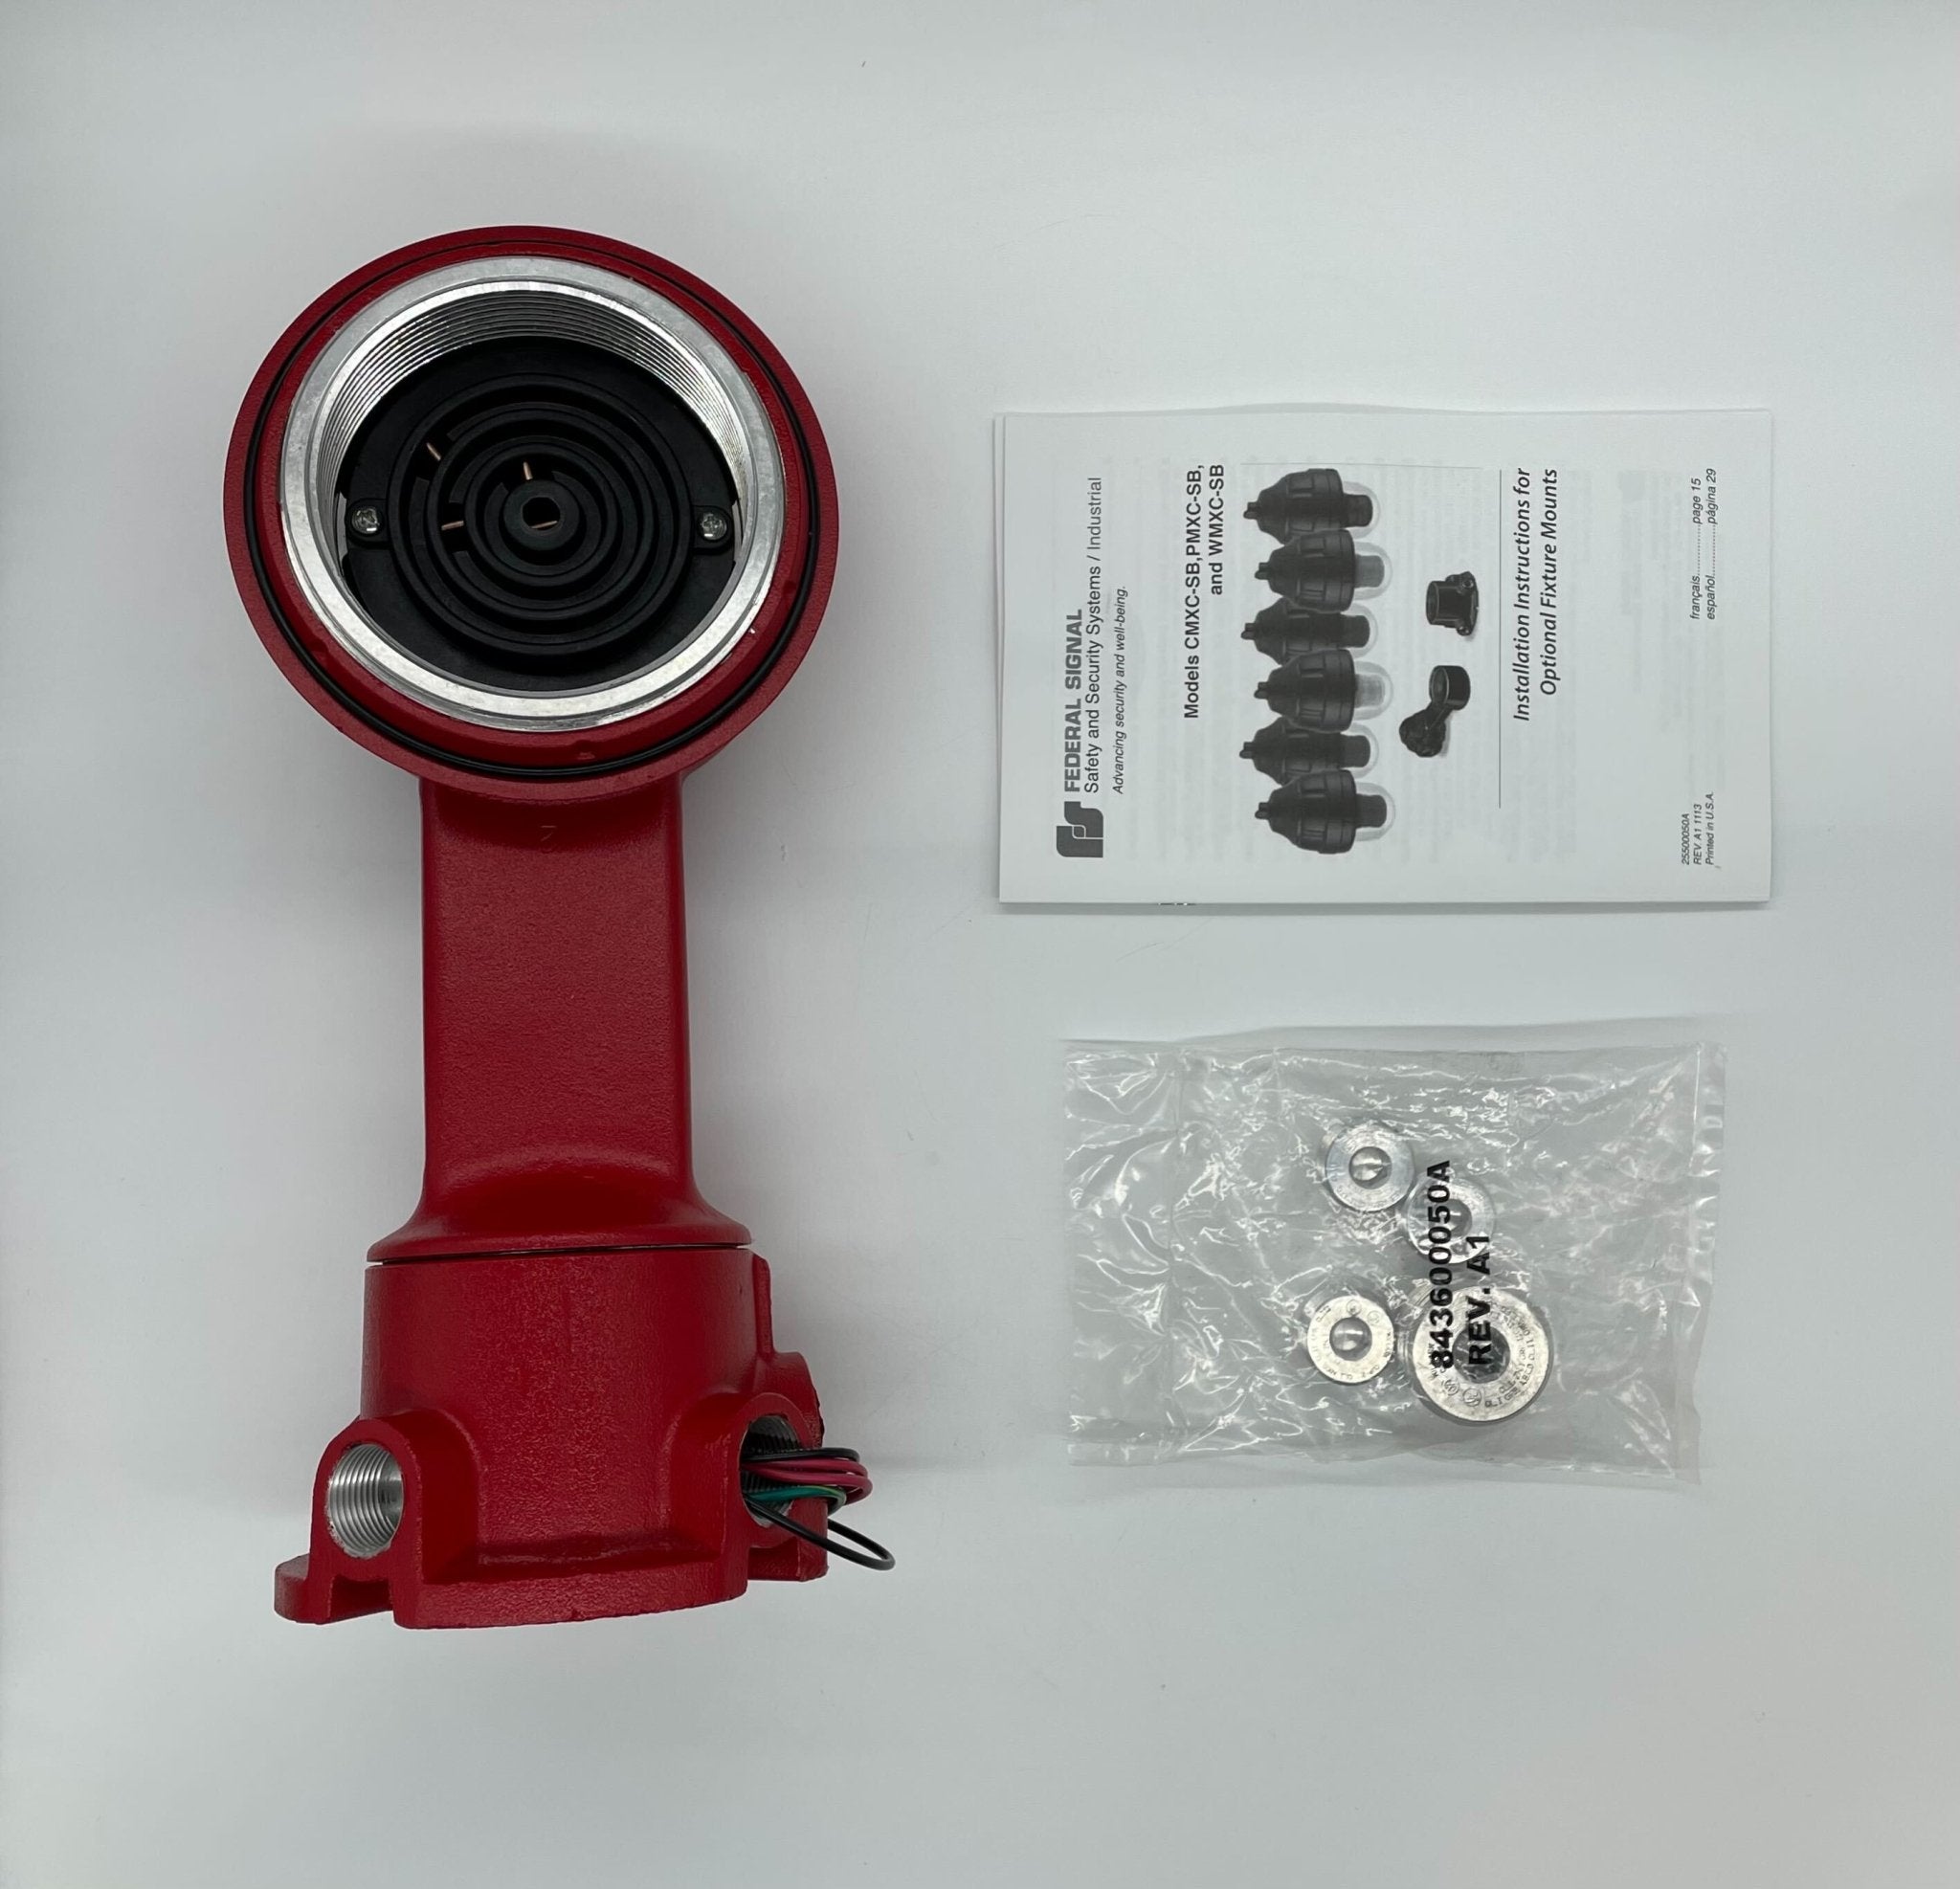 Potter WMXC-4R-SB - The Fire Alarm Supplier